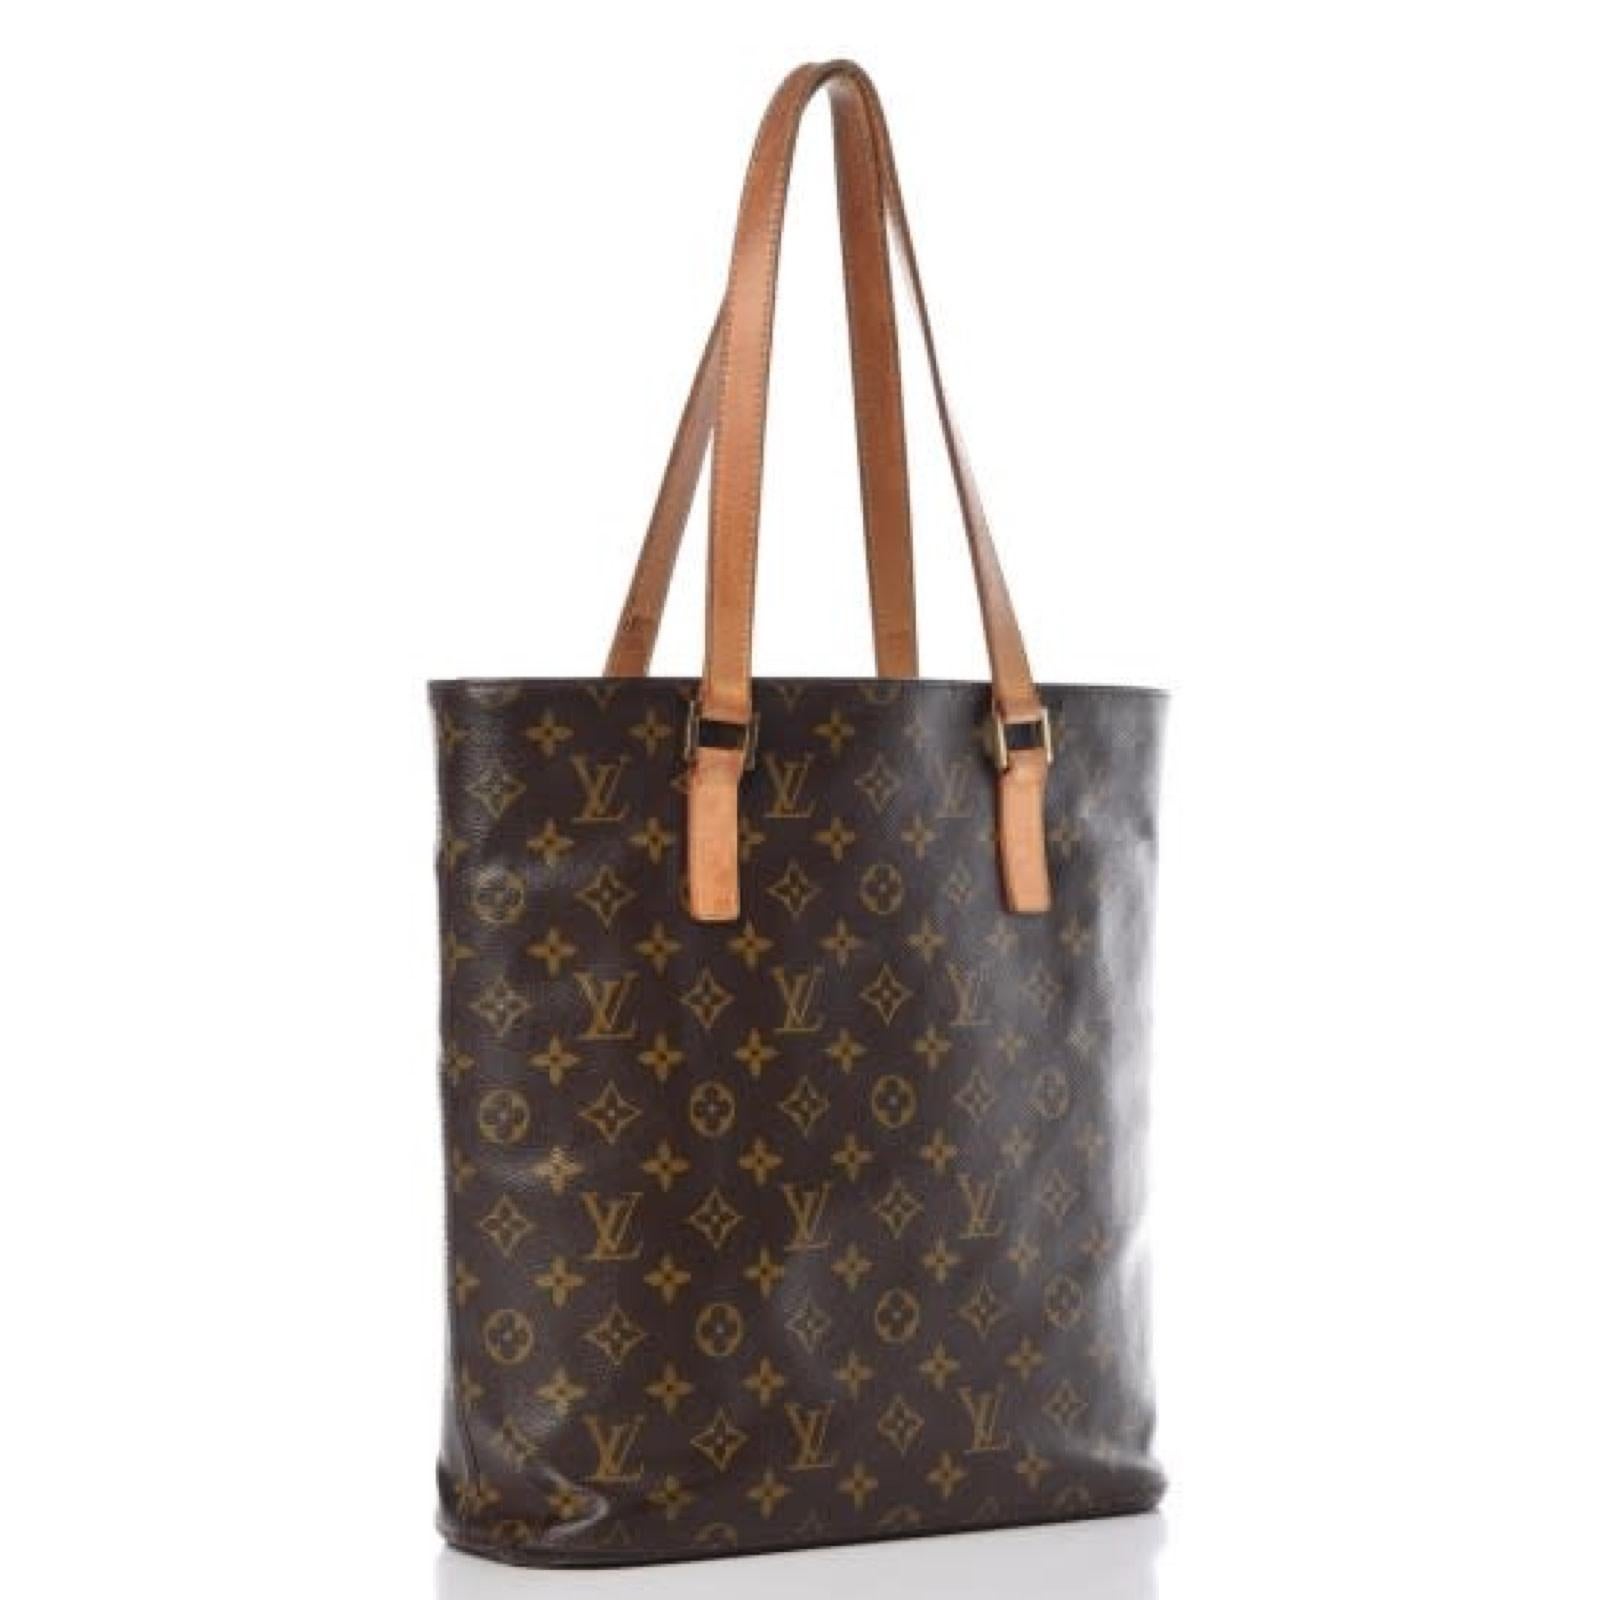 This shoulder bag is made of signature Louis Vuitton monogram coated canvas. The bag features vachetta cowhide leather shoulder straps and a brown woven fabric interior.

COLOR: Brown
MATERIAL: Coated canvas
ITEM CODE: SP0952
MEASURES: H 12.25” x L